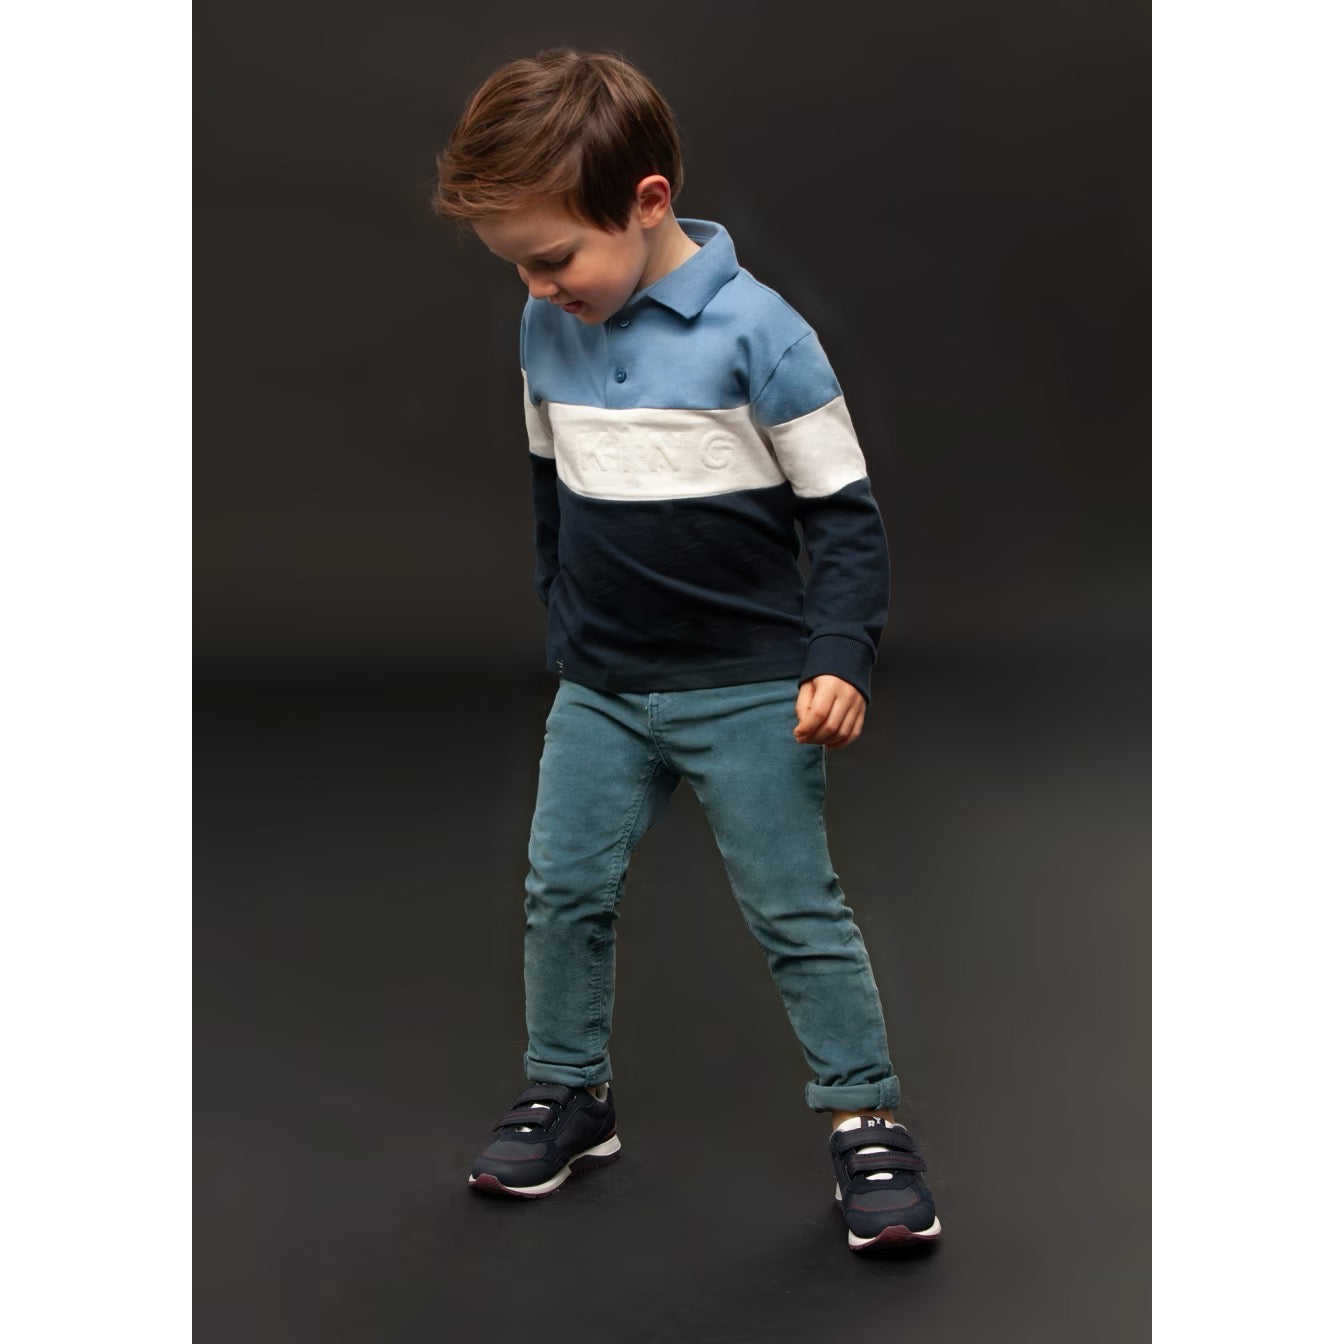 Mayoral Boys Cord Trousers 537 Stone Blue Clothing 4YRS / Blue,6YRS / Blue,7YRS / Blue,8YRS / Blue,9YRS / Blue